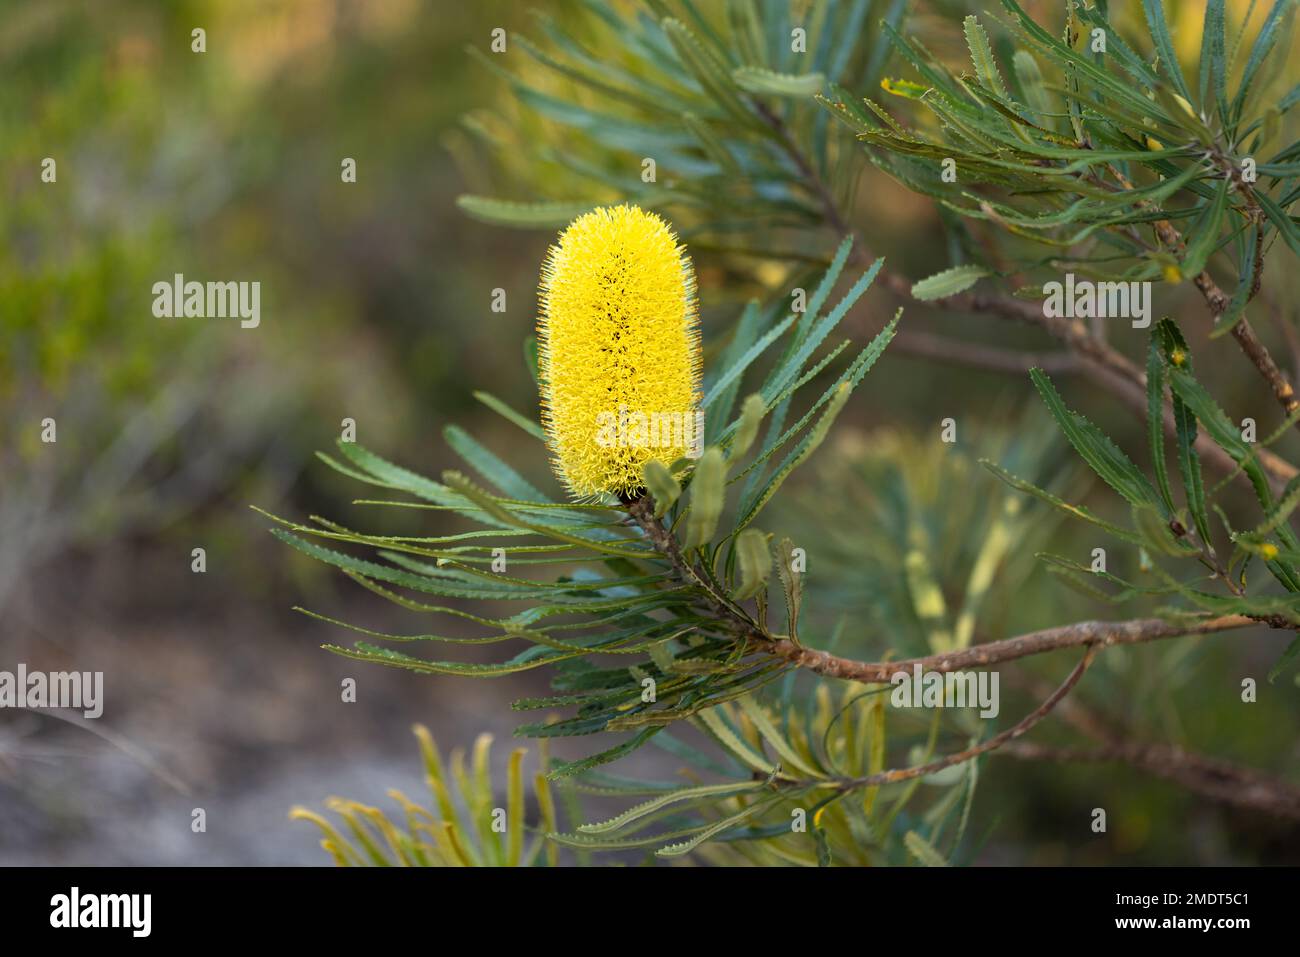 one yellow candlestick banksia flower amongst green serrated leaves Stock Photo